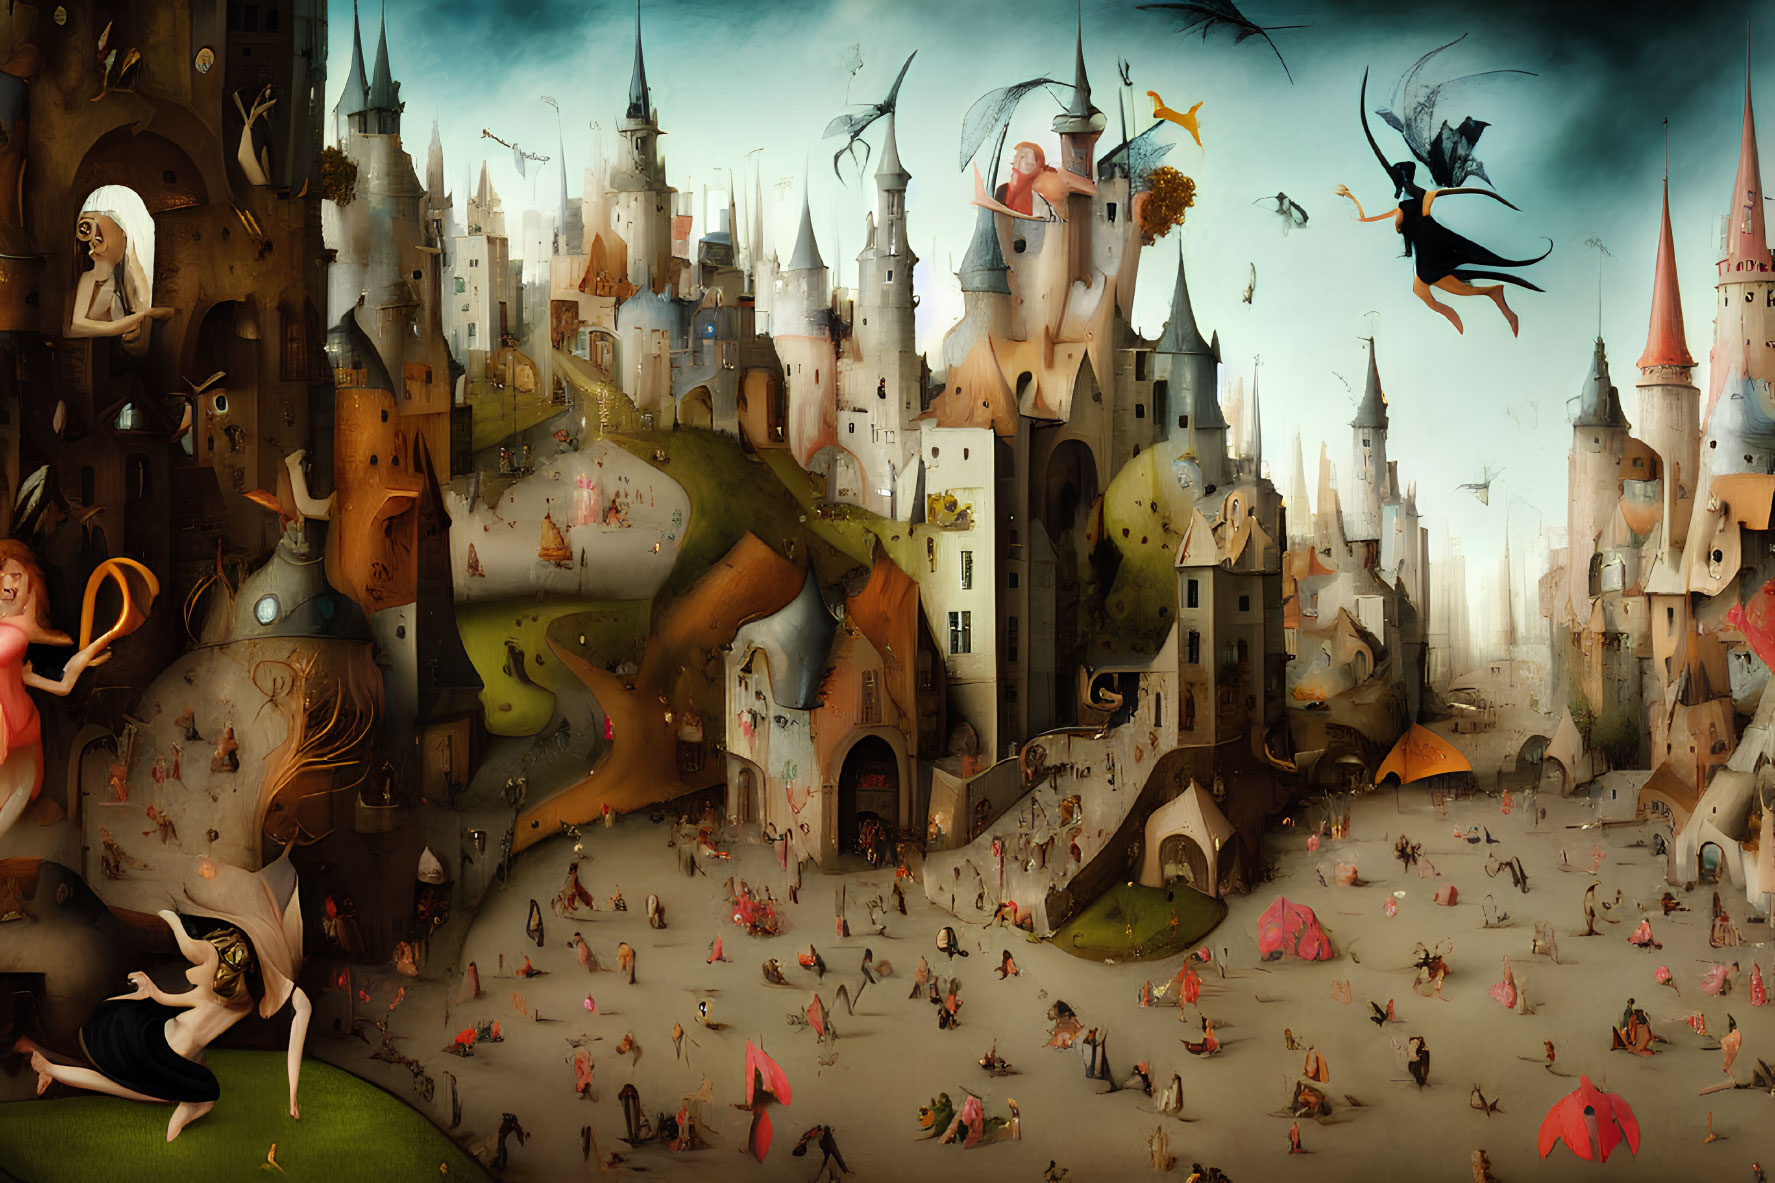 Whimsical surreal landscape with castles, figures, creatures, and woman's face